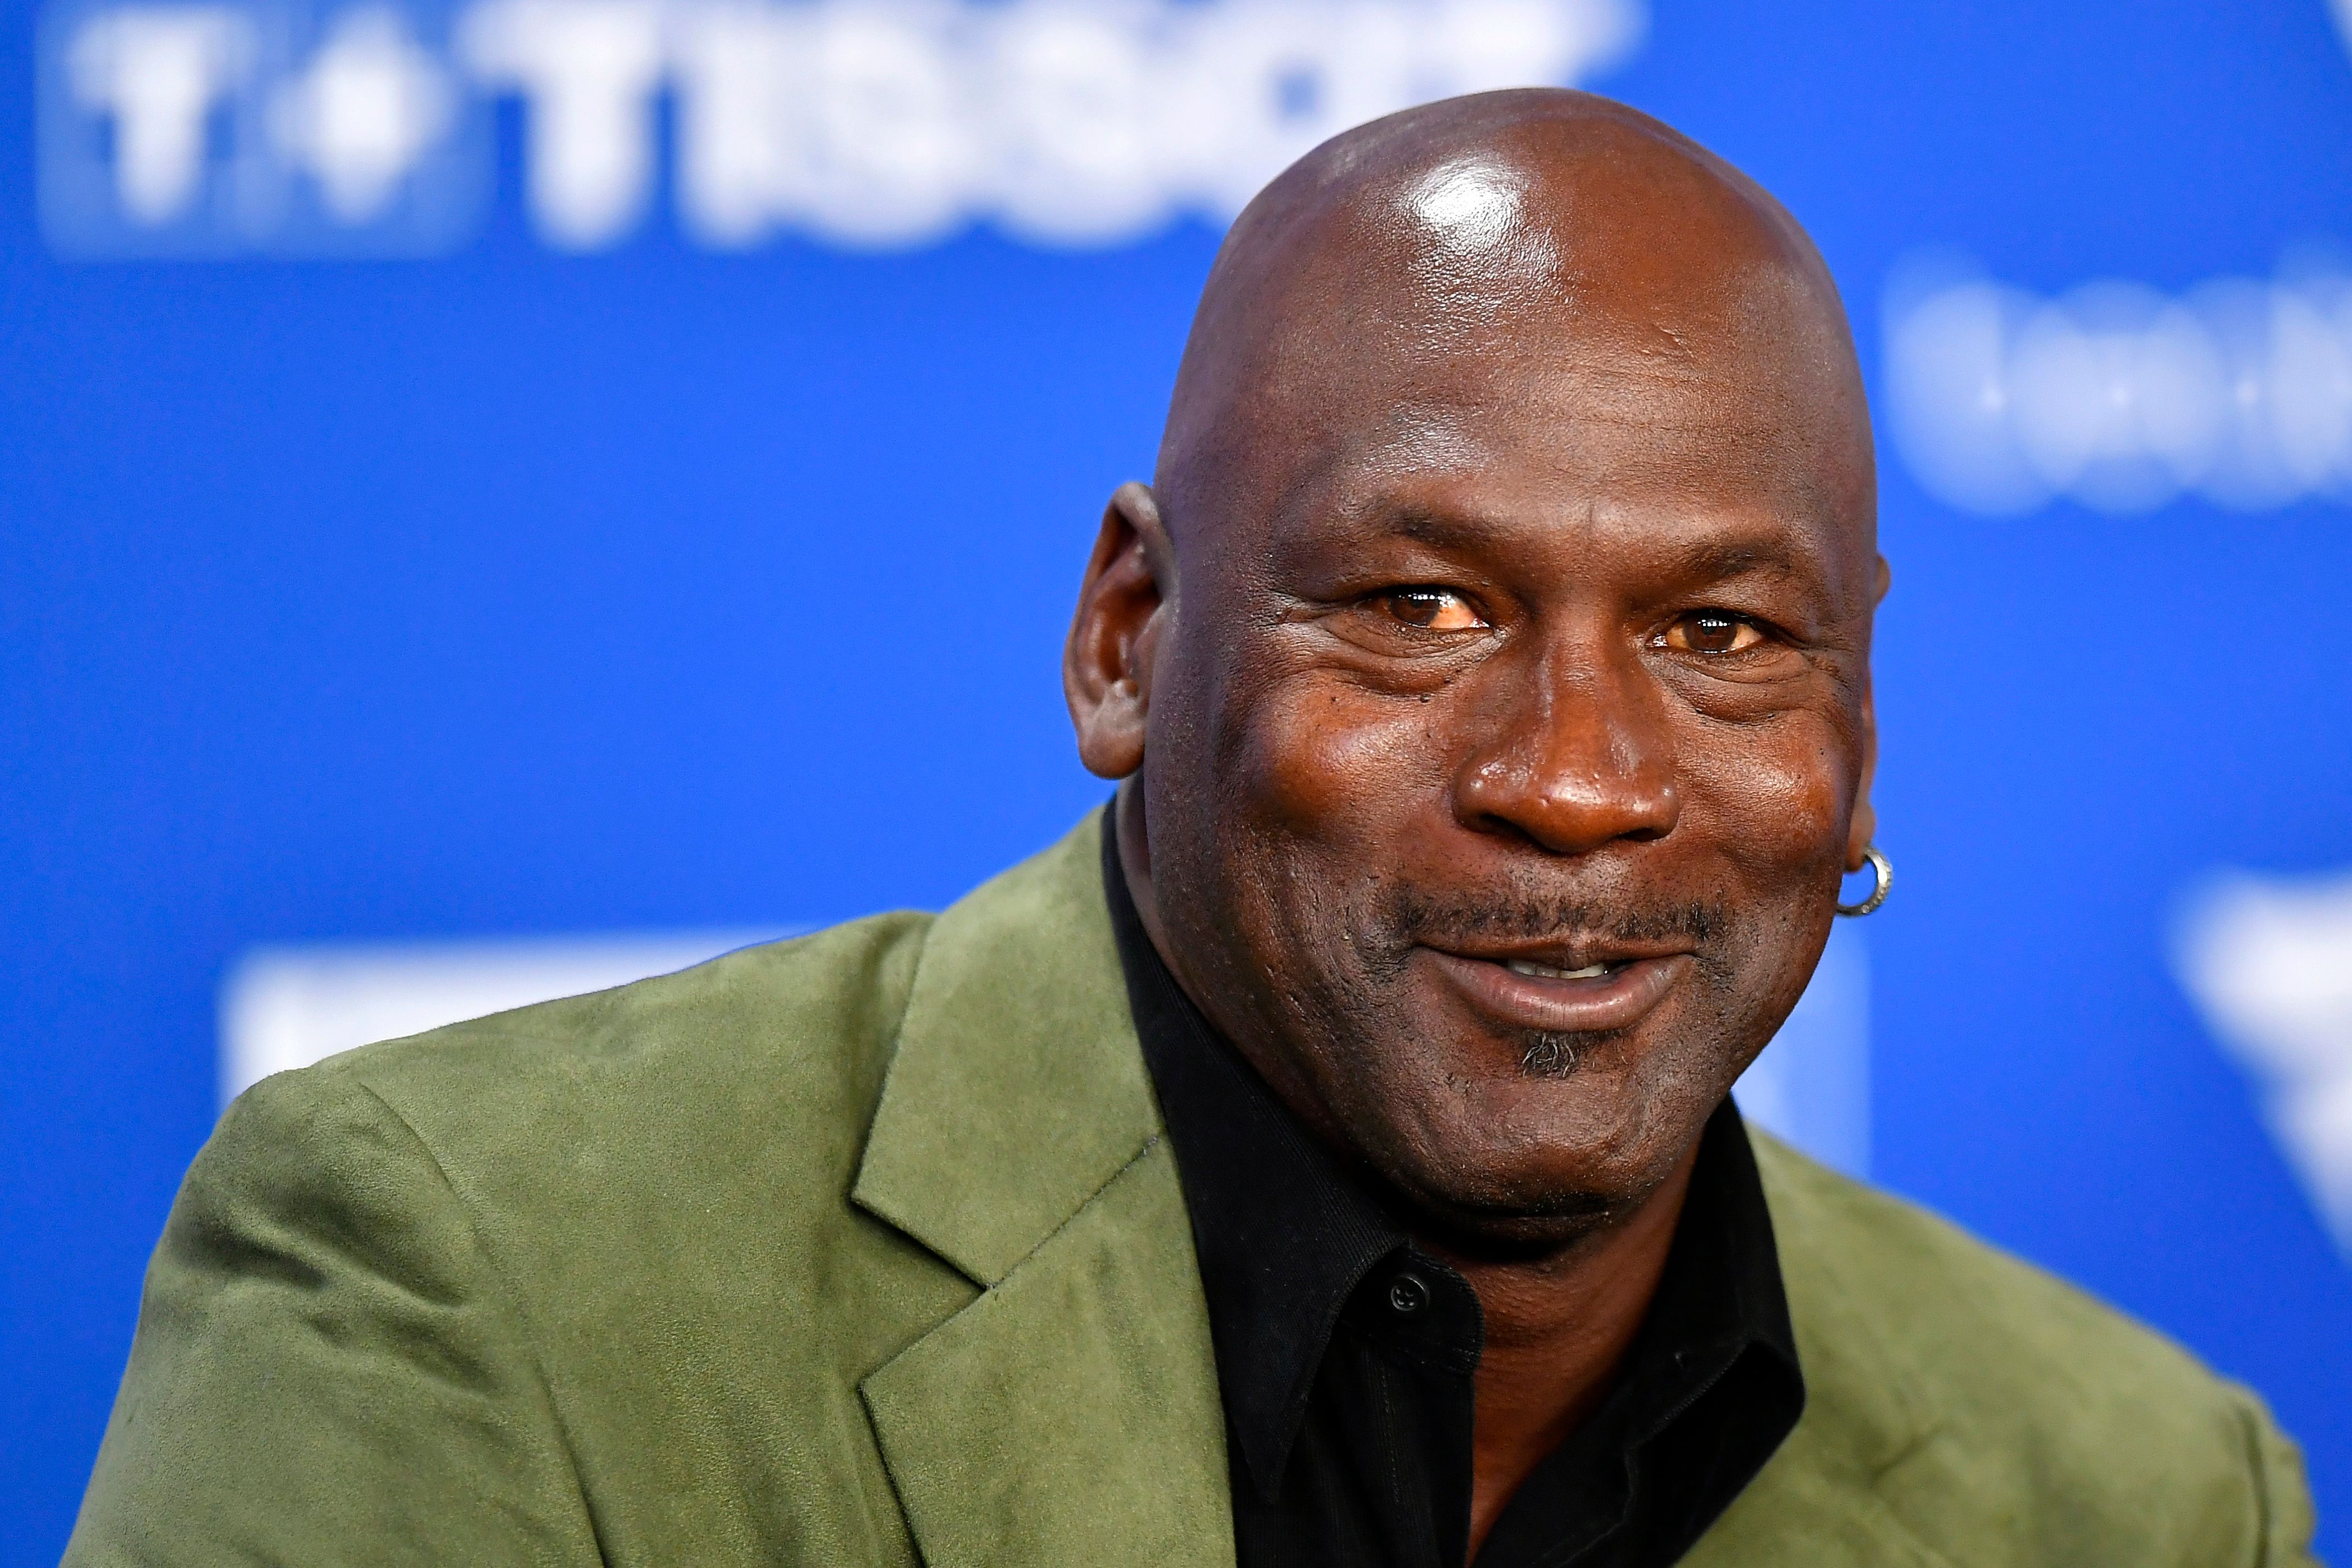 Michael Jordan during a press conference before the NBA Paris Game match between the Charlotte Hornets and Milwaukee Bucks on January 24, 2020 in Paris, France. | Source: Getty Images